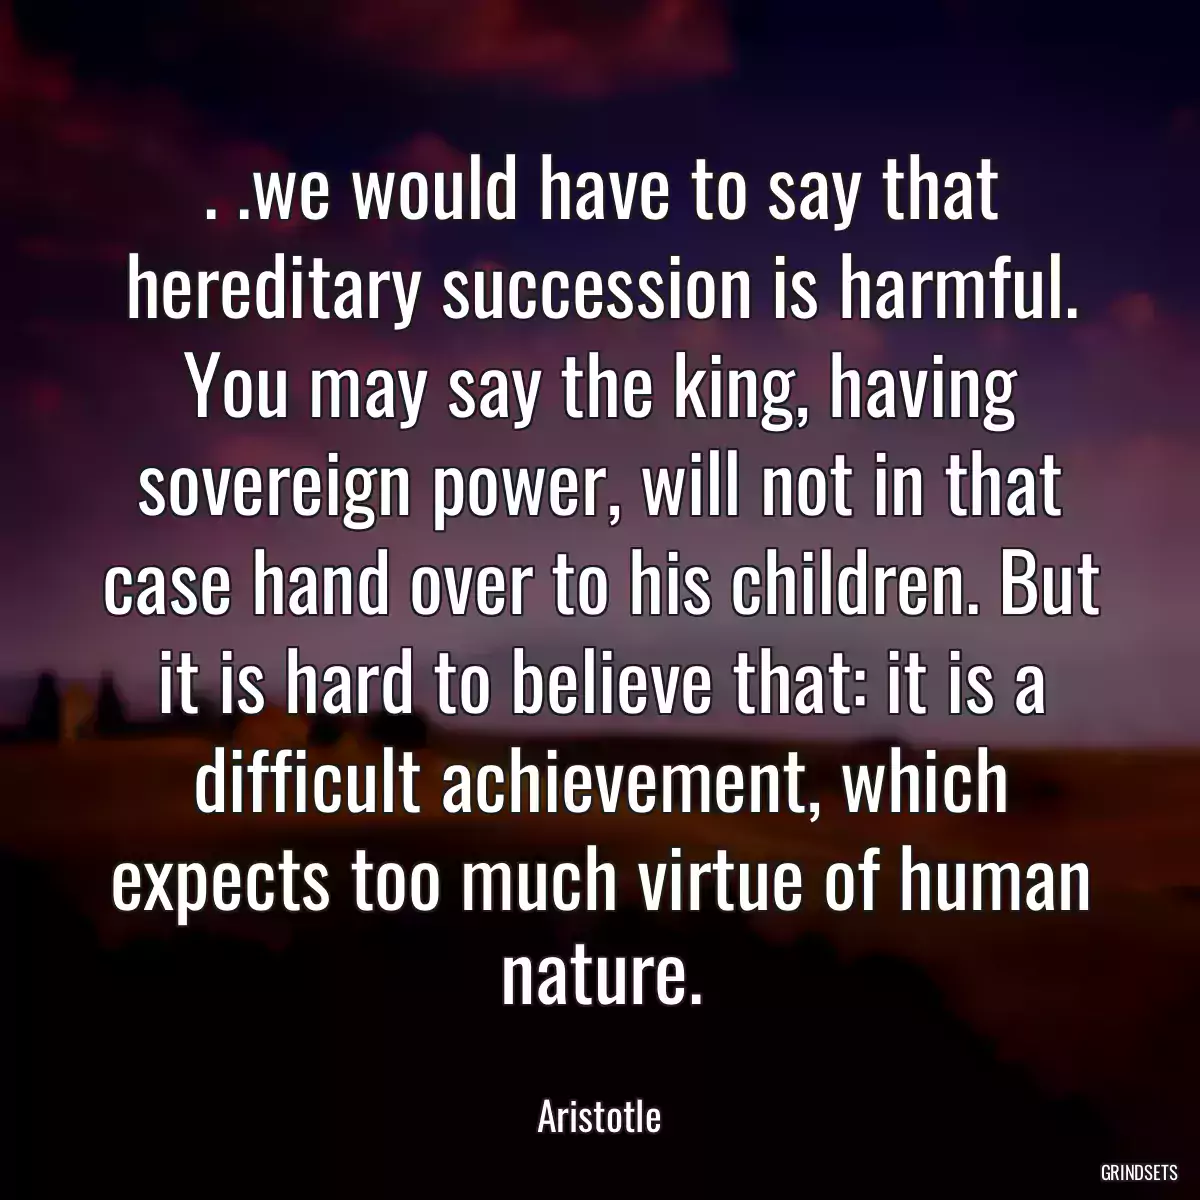 . .we would have to say that hereditary succession is harmful. You may say the king, having sovereign power, will not in that case hand over to his children. But it is hard to believe that: it is a difficult achievement, which expects too much virtue of human nature.